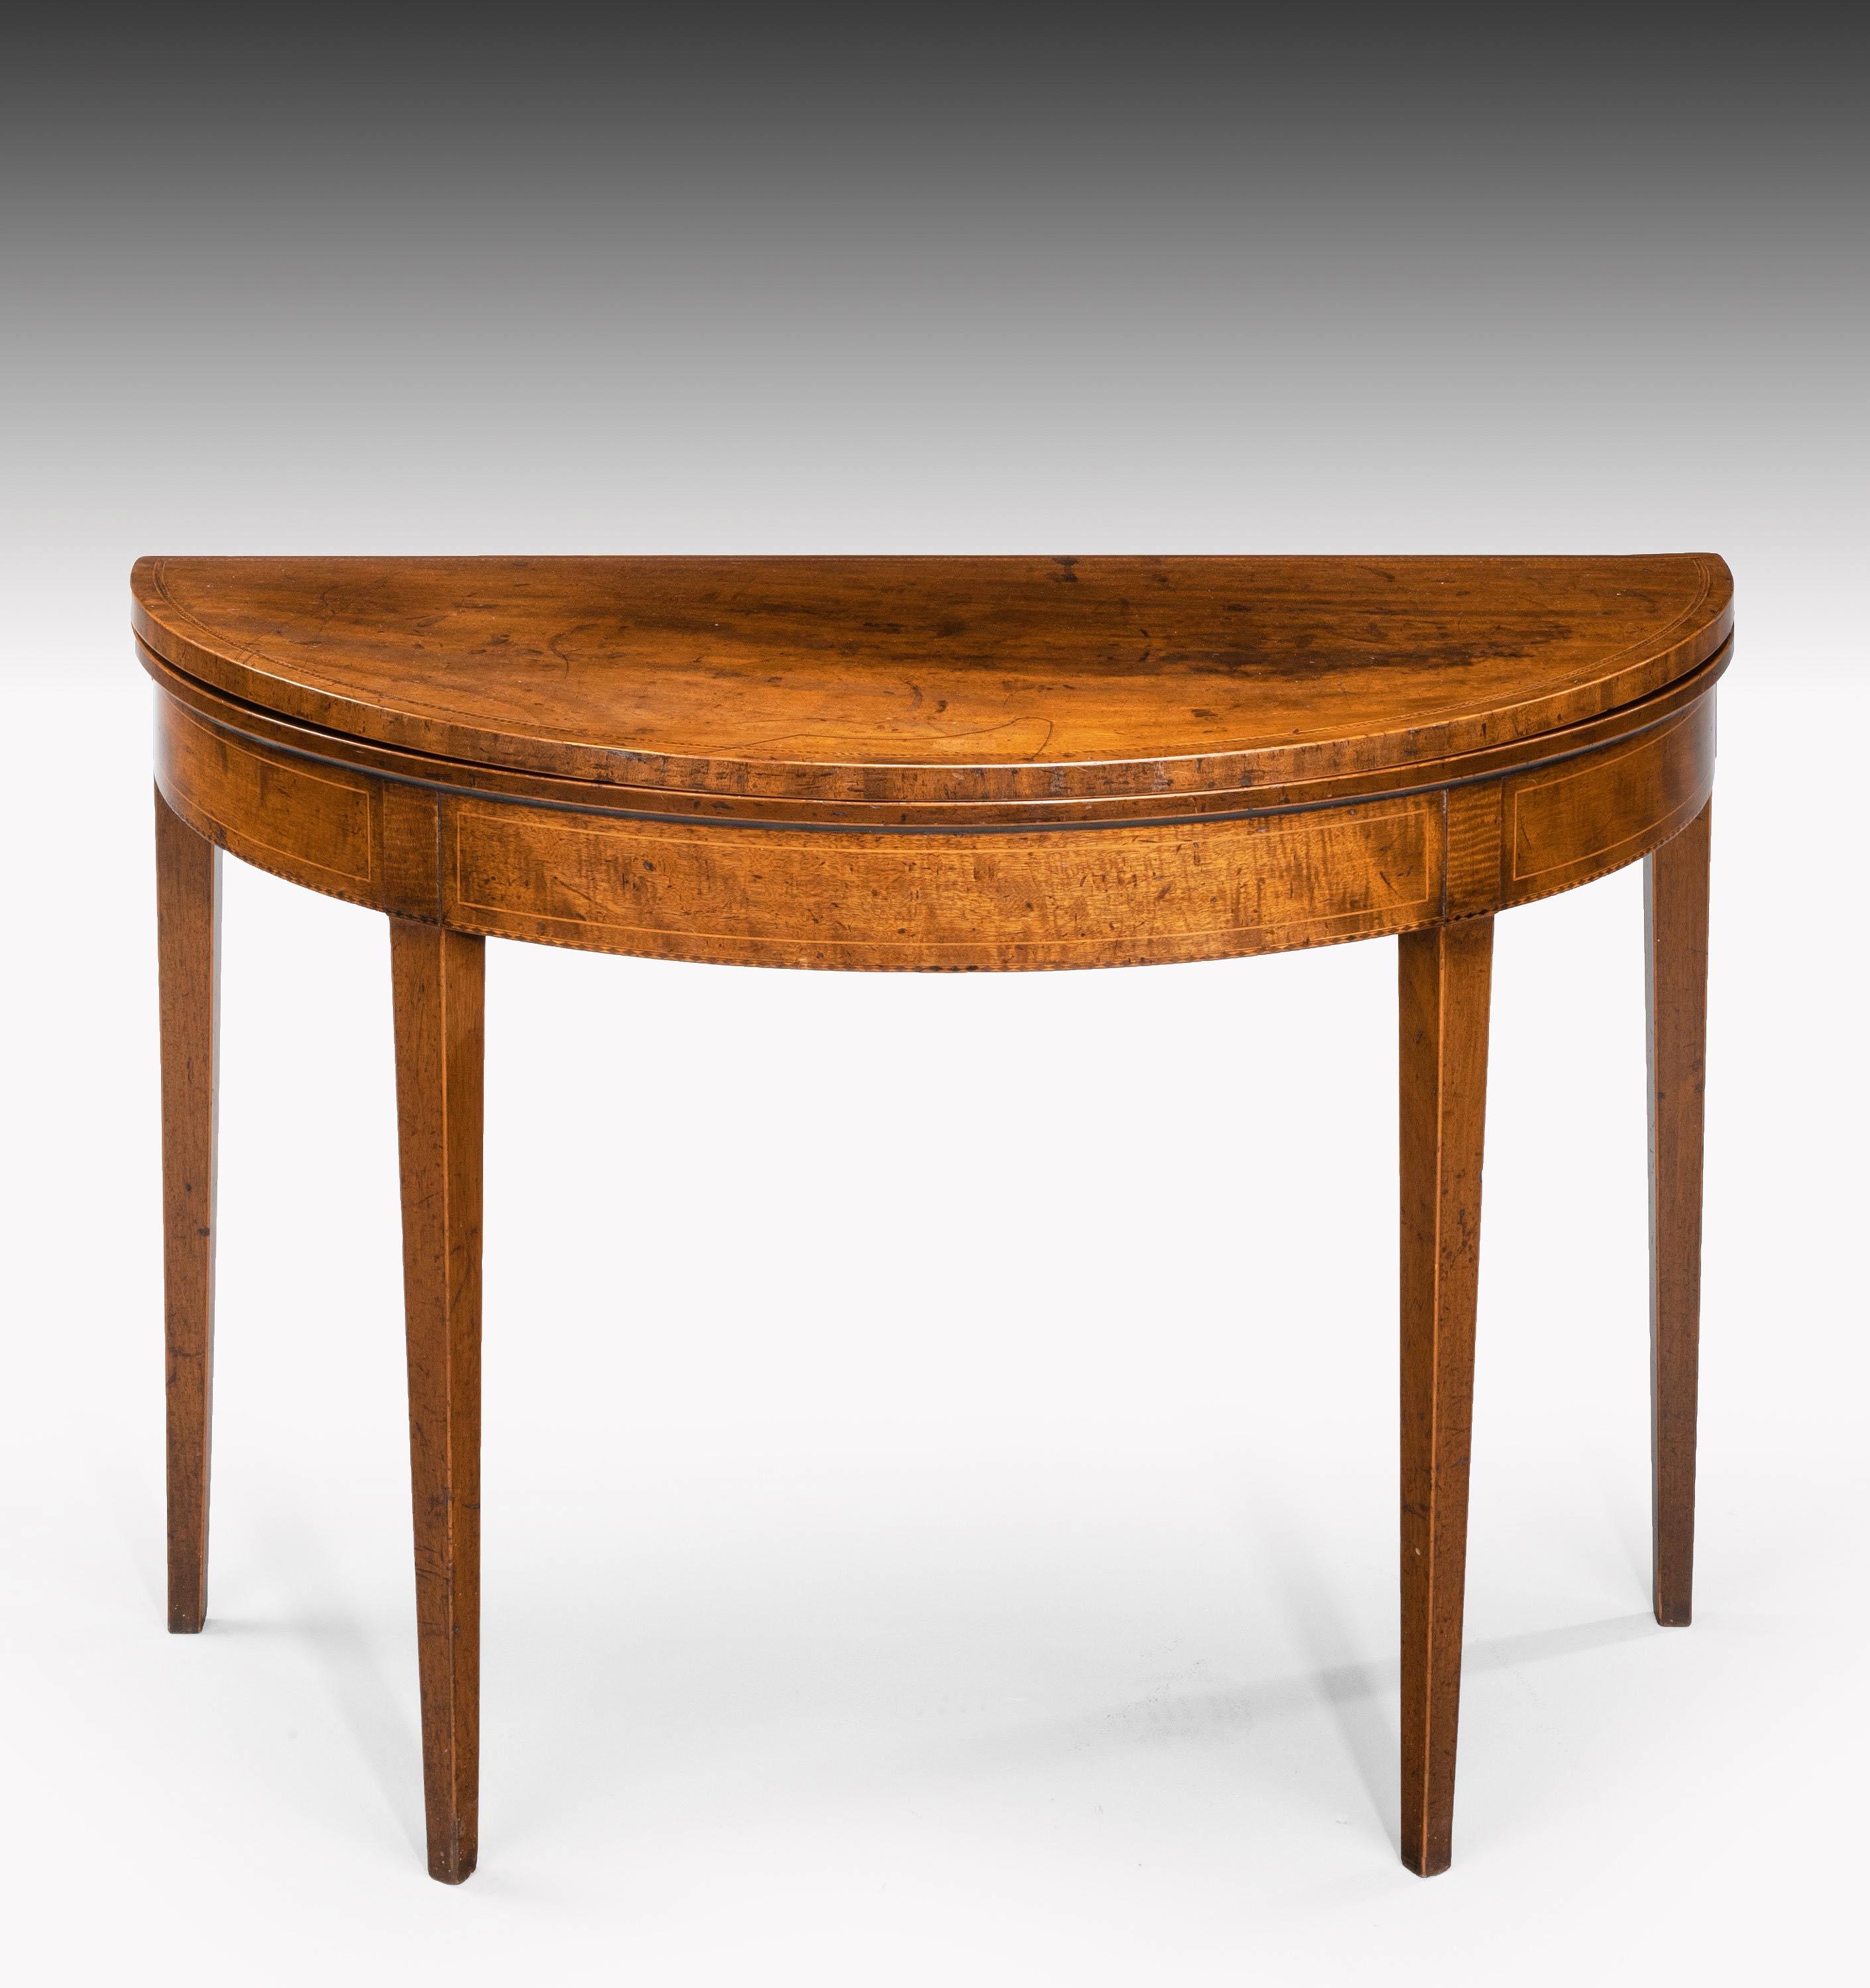 George III Period Mahogany Demilune Tea Table In Good Condition In Peterborough, Northamptonshire